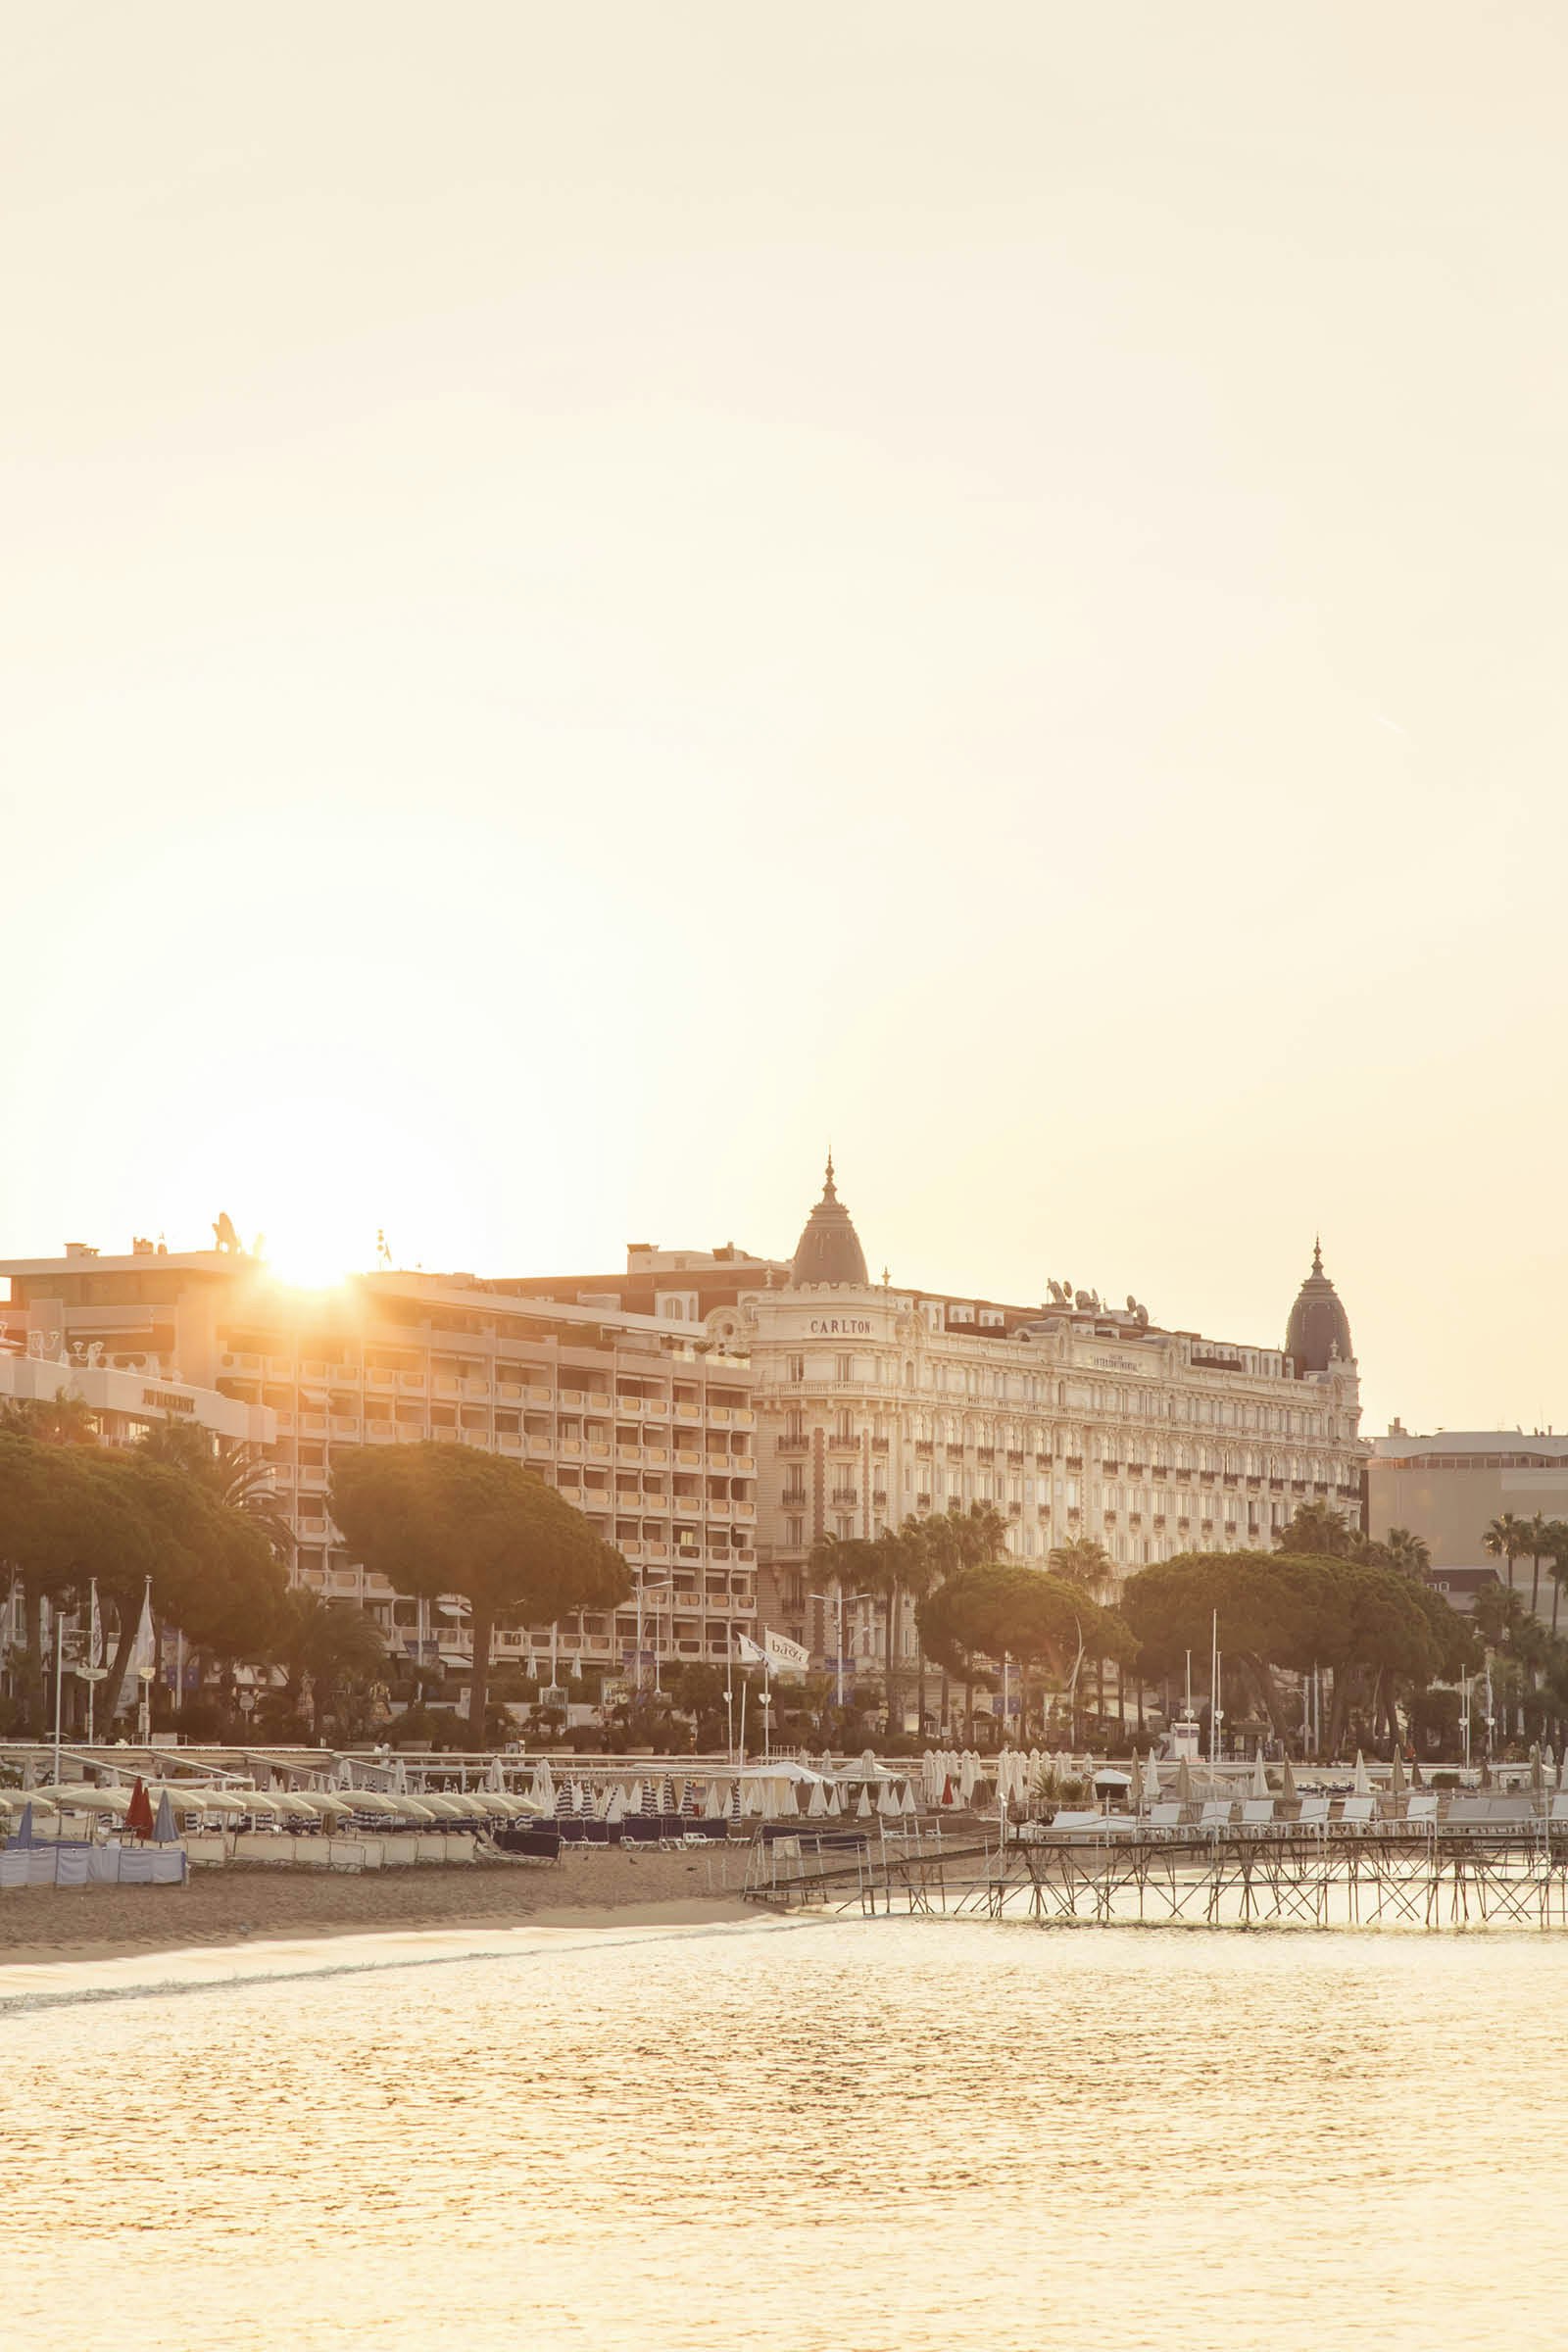 The sun breaks over the roof of the InterContinental Carlton in Cannes